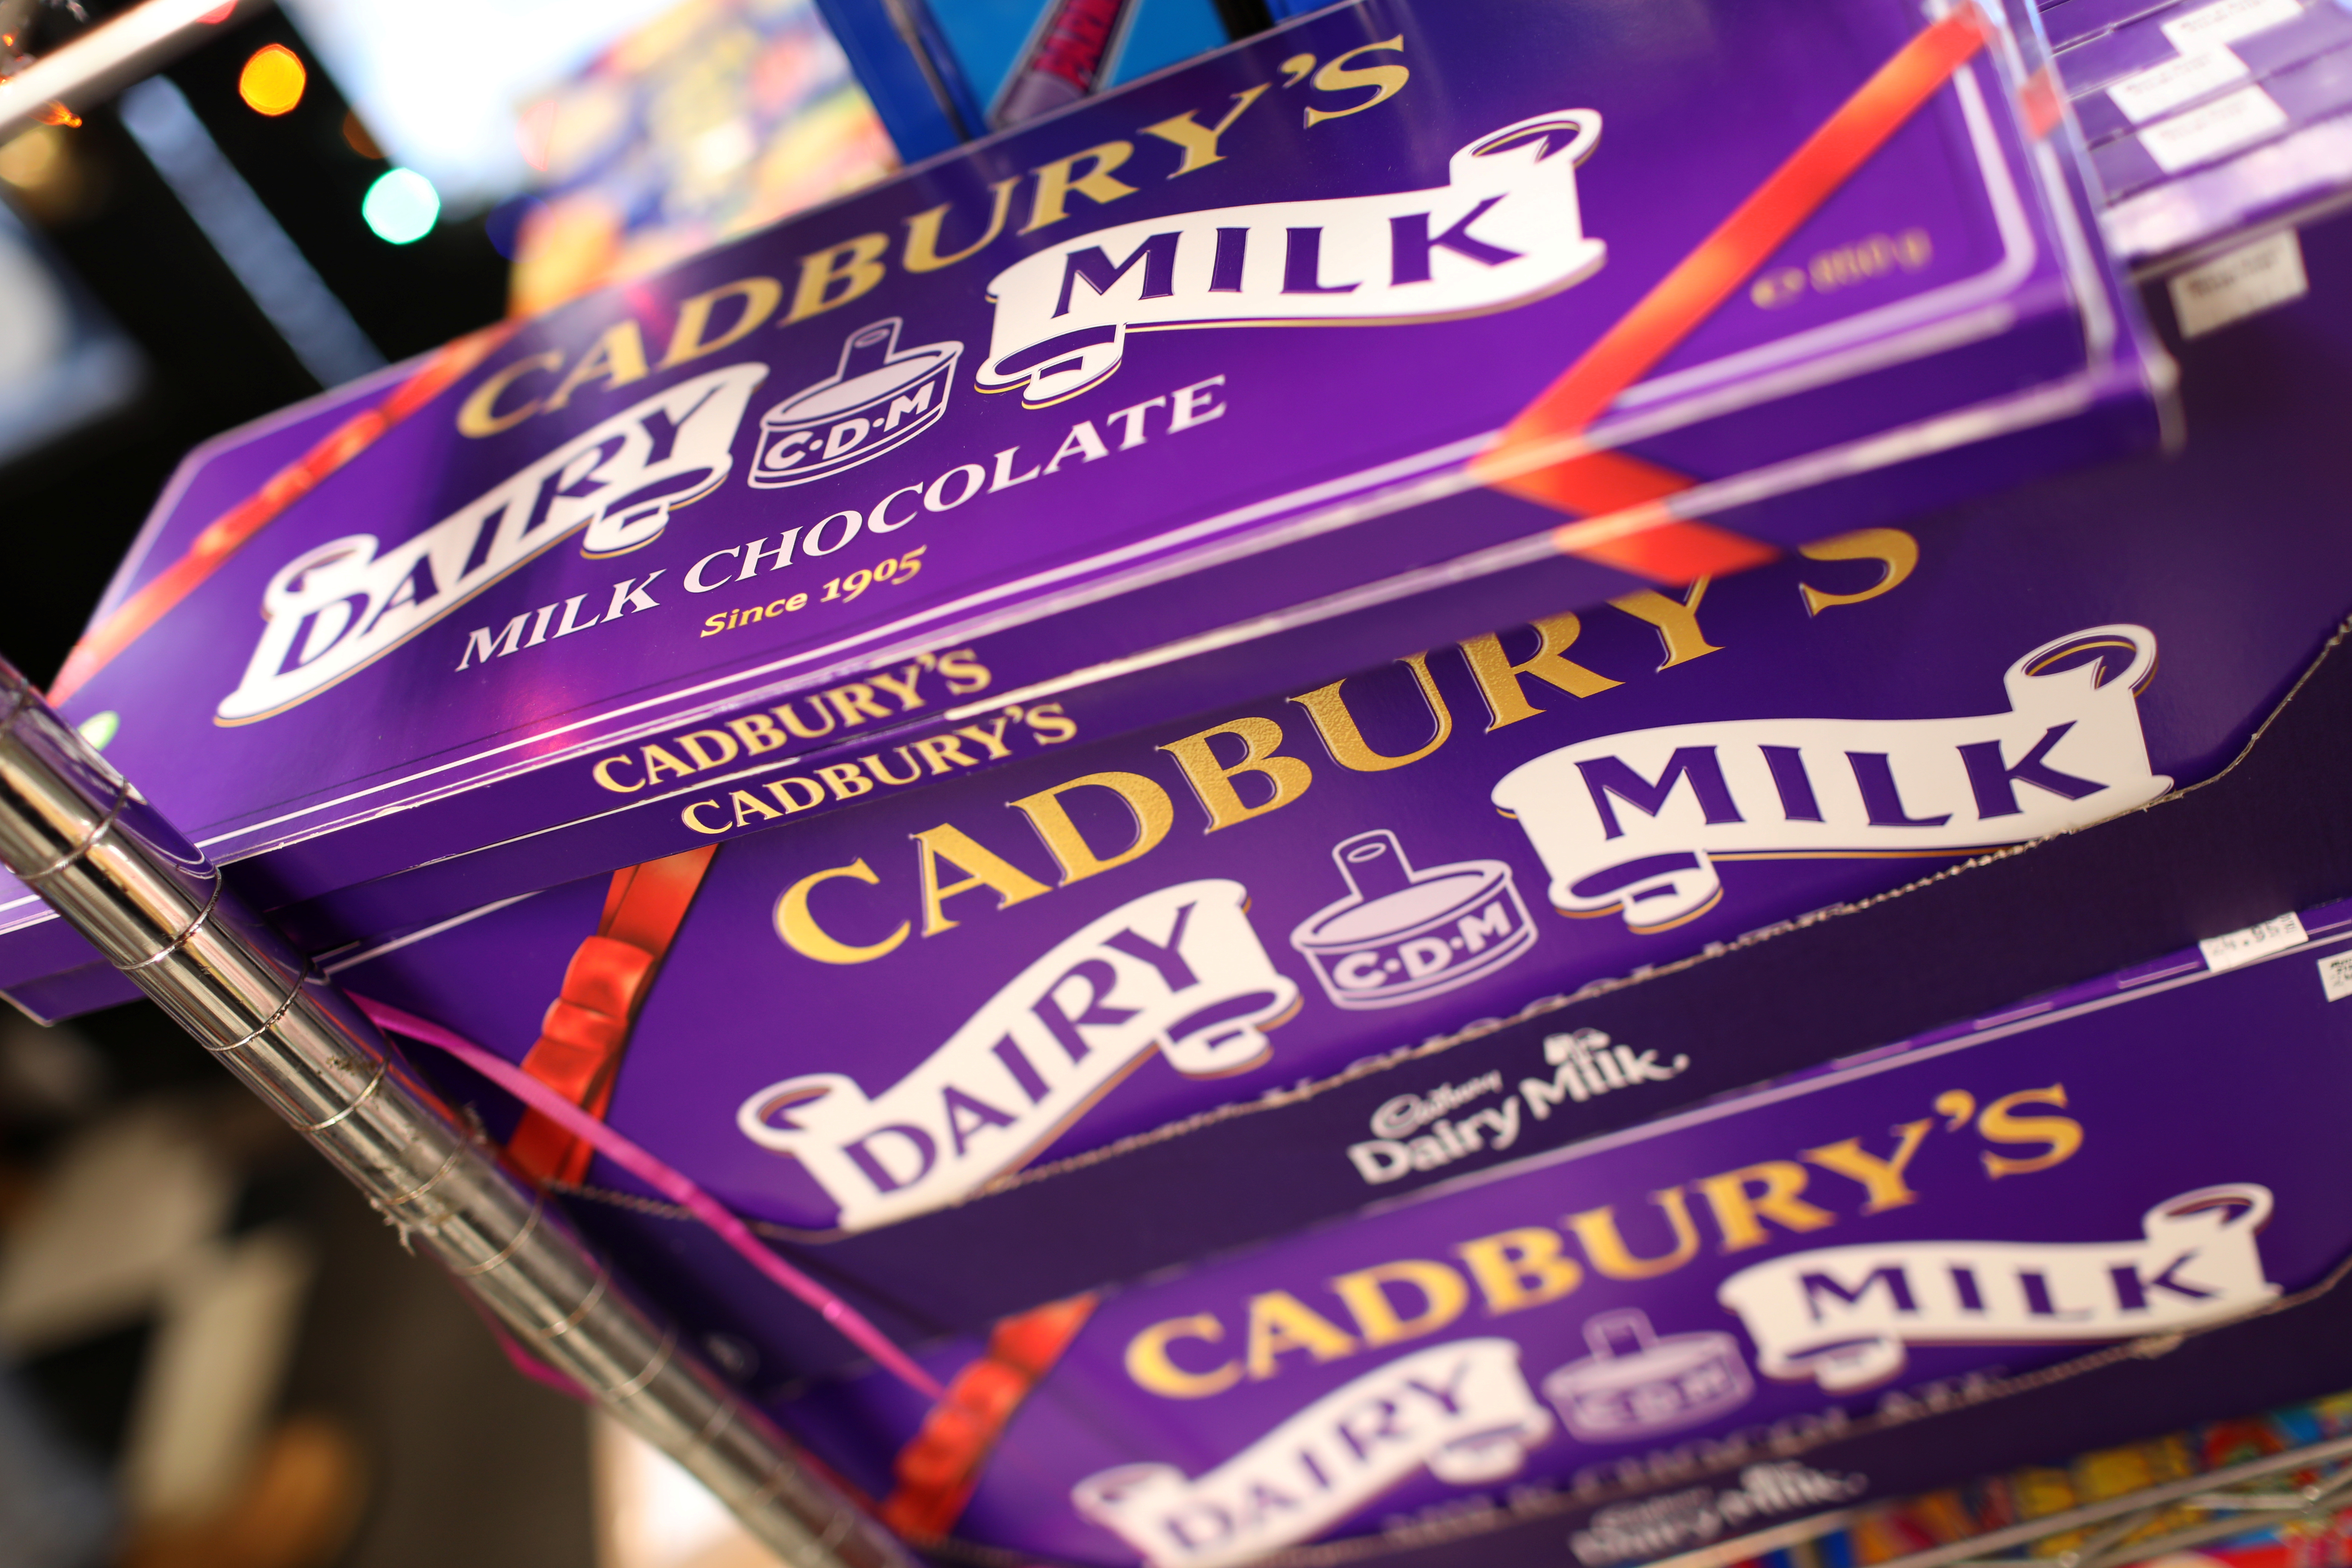 Cadbury-maker Mondelez to invest $600 mln on sustainable cocoa sourcing